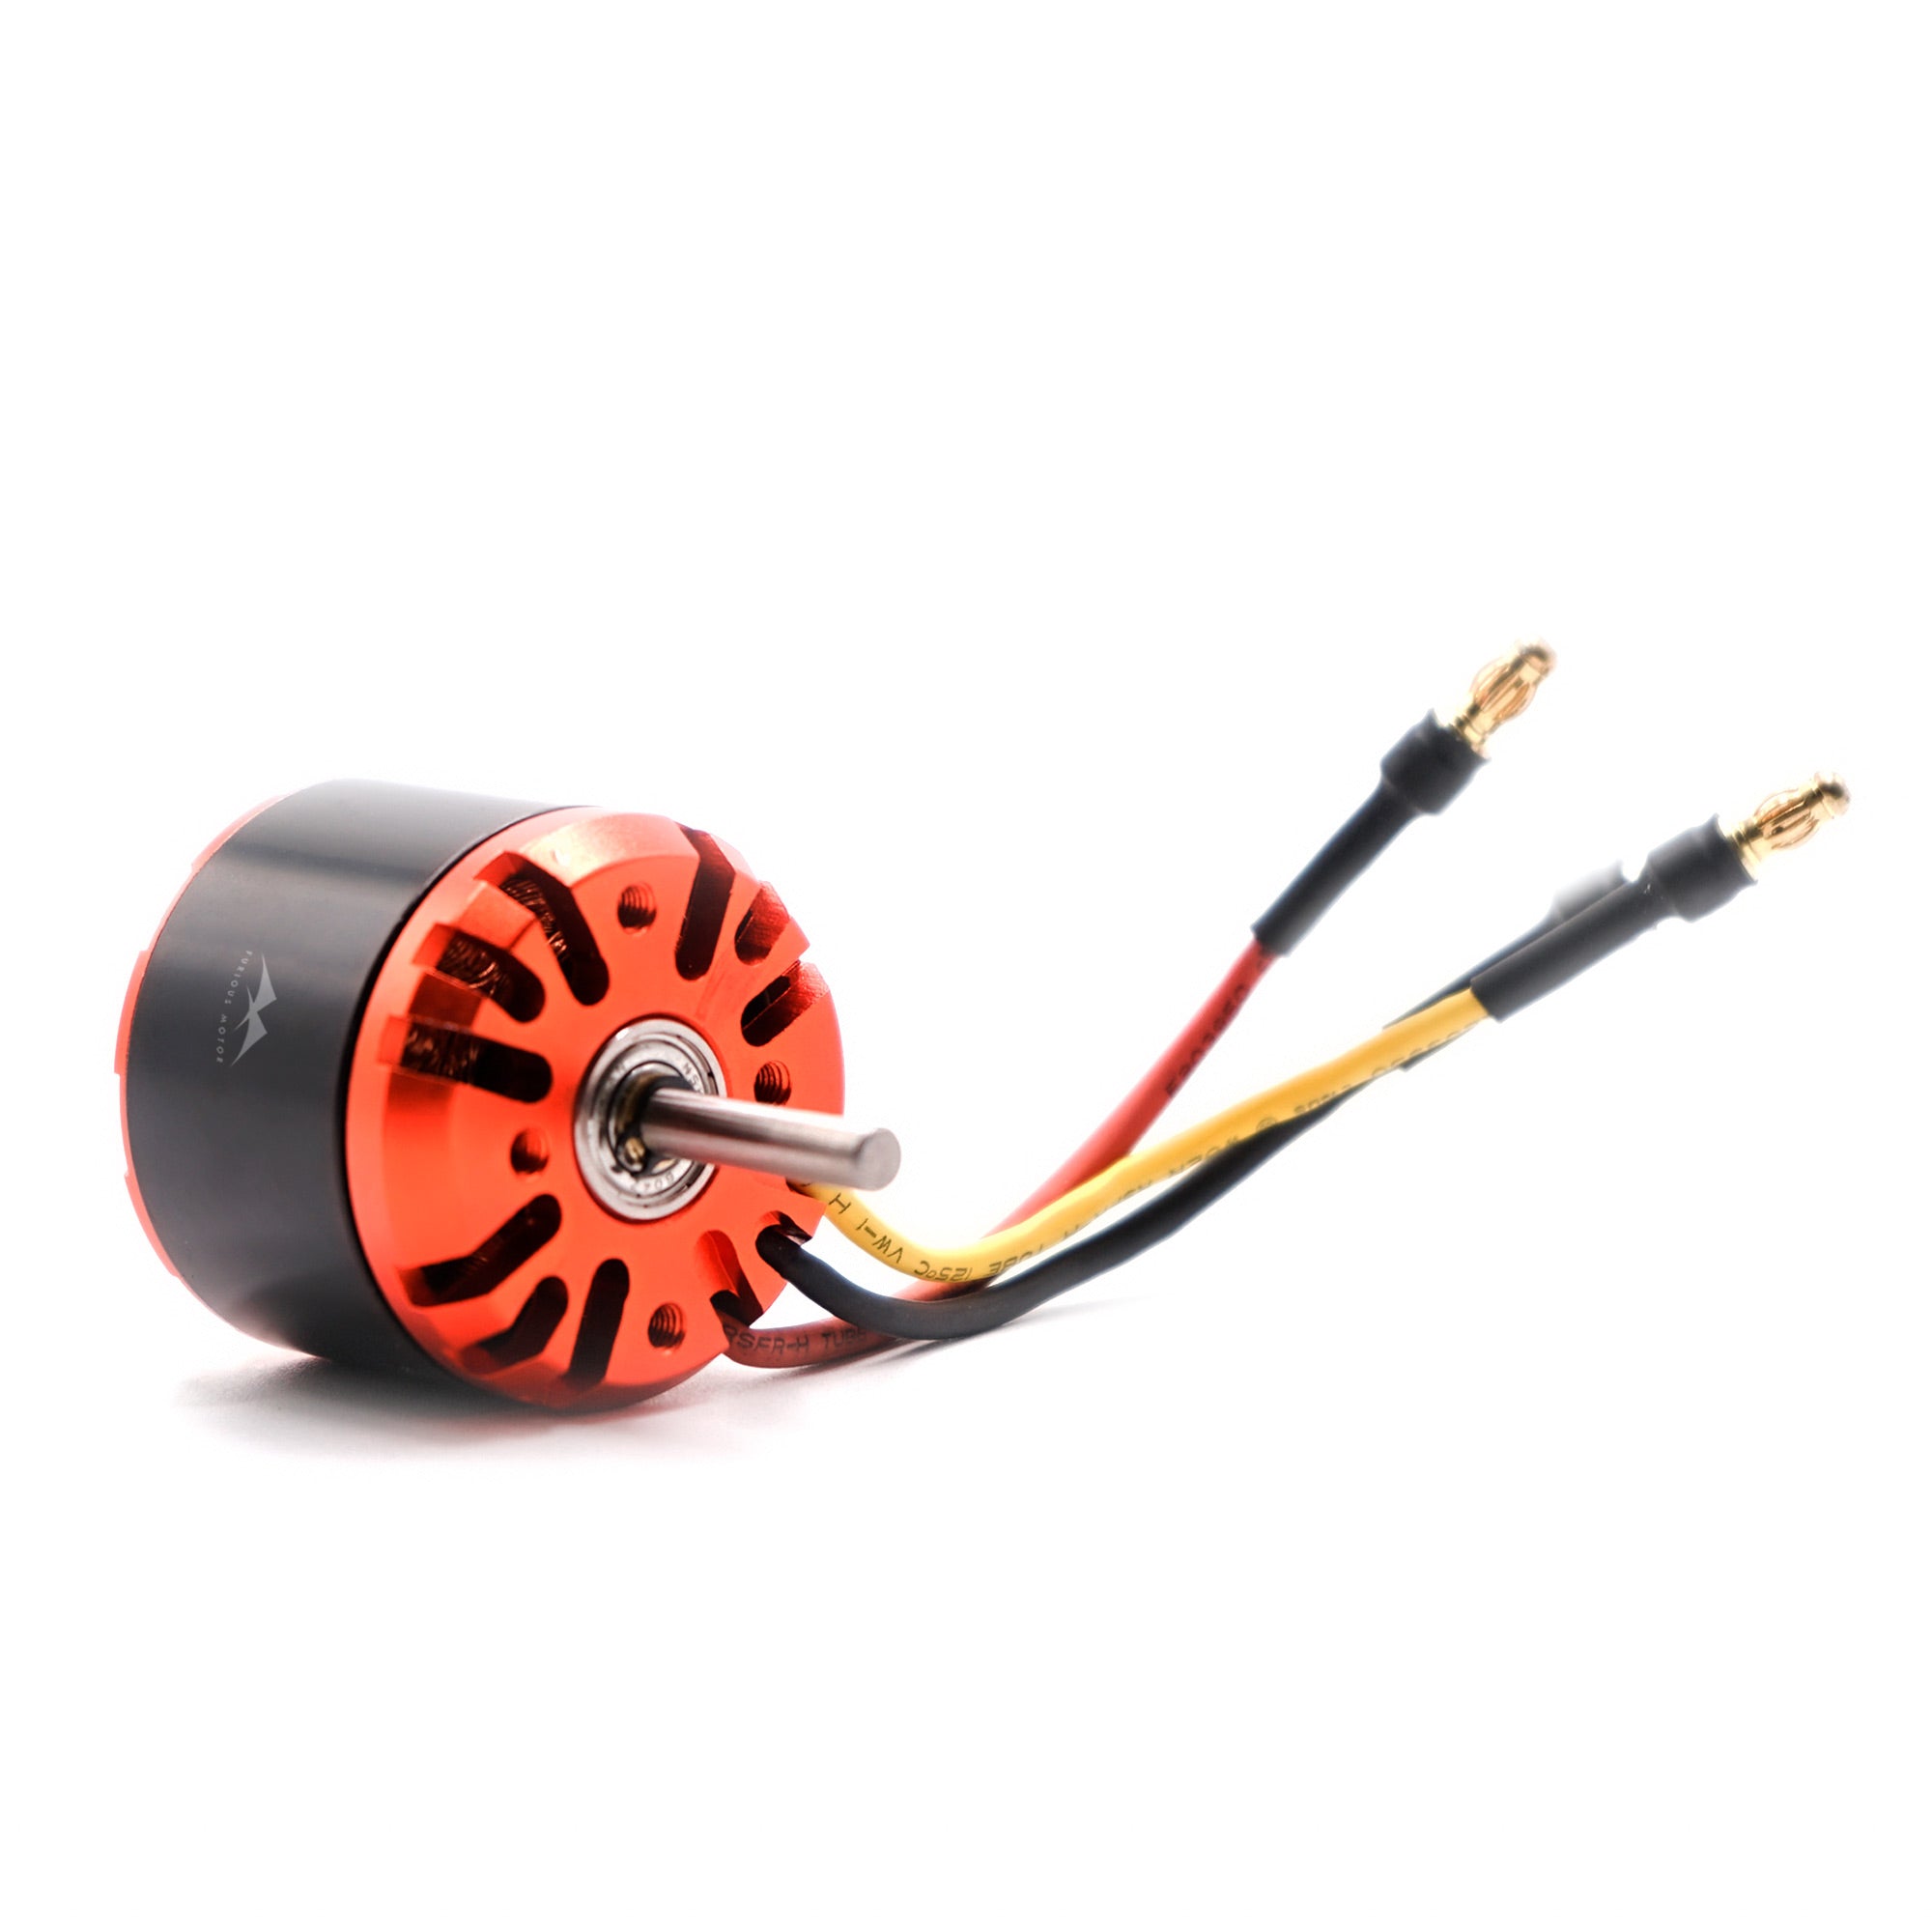 2830 Lightweight Brushless DC Motor for Racing Drone DIY Project and Electric Tool